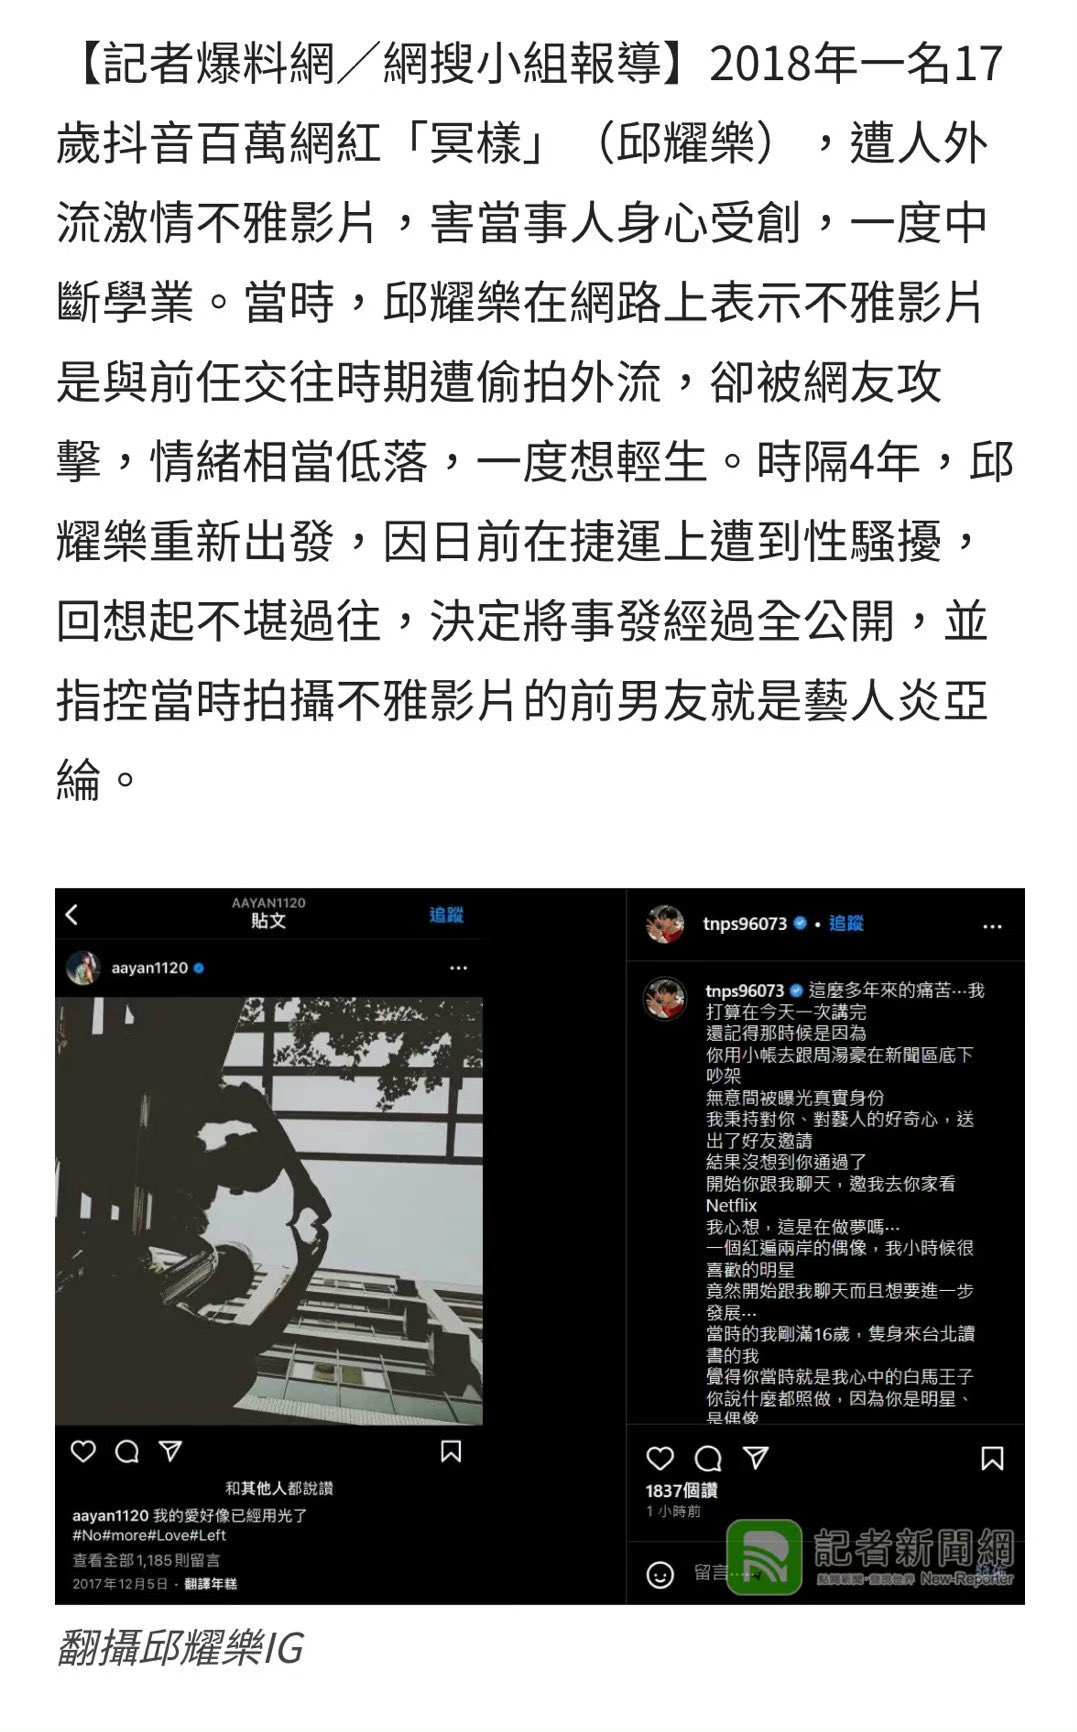 weibo go sub on X: A trending post says that long hair will only